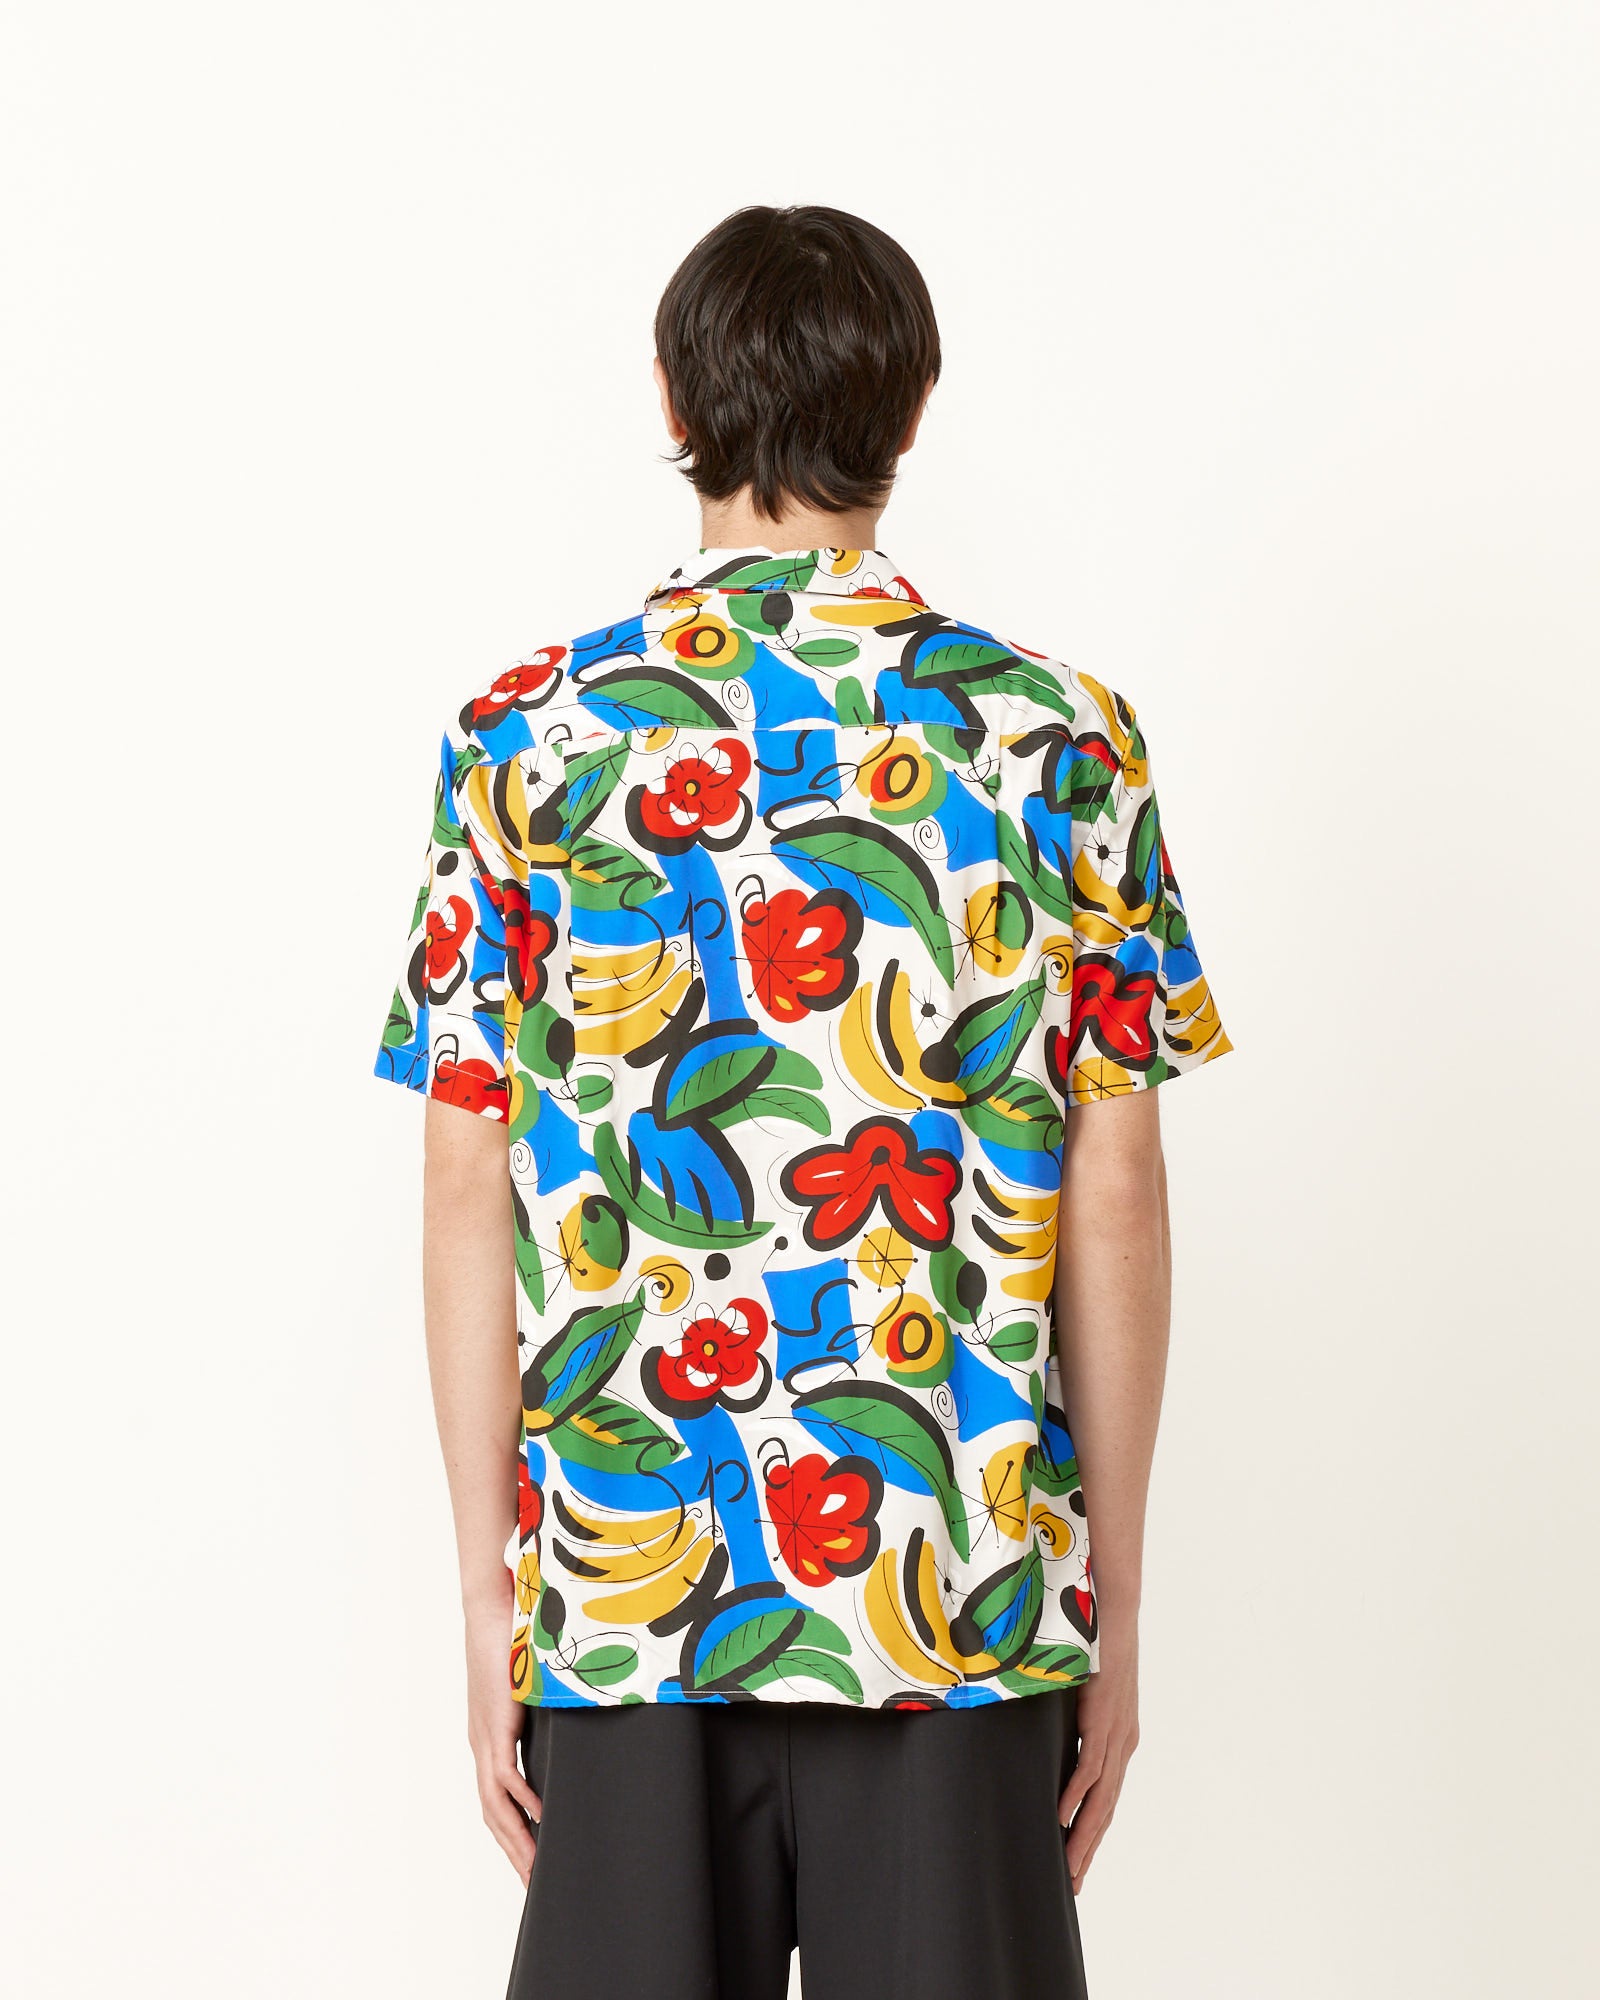 Short Sleeve Camp Shirt in Homage To Miro